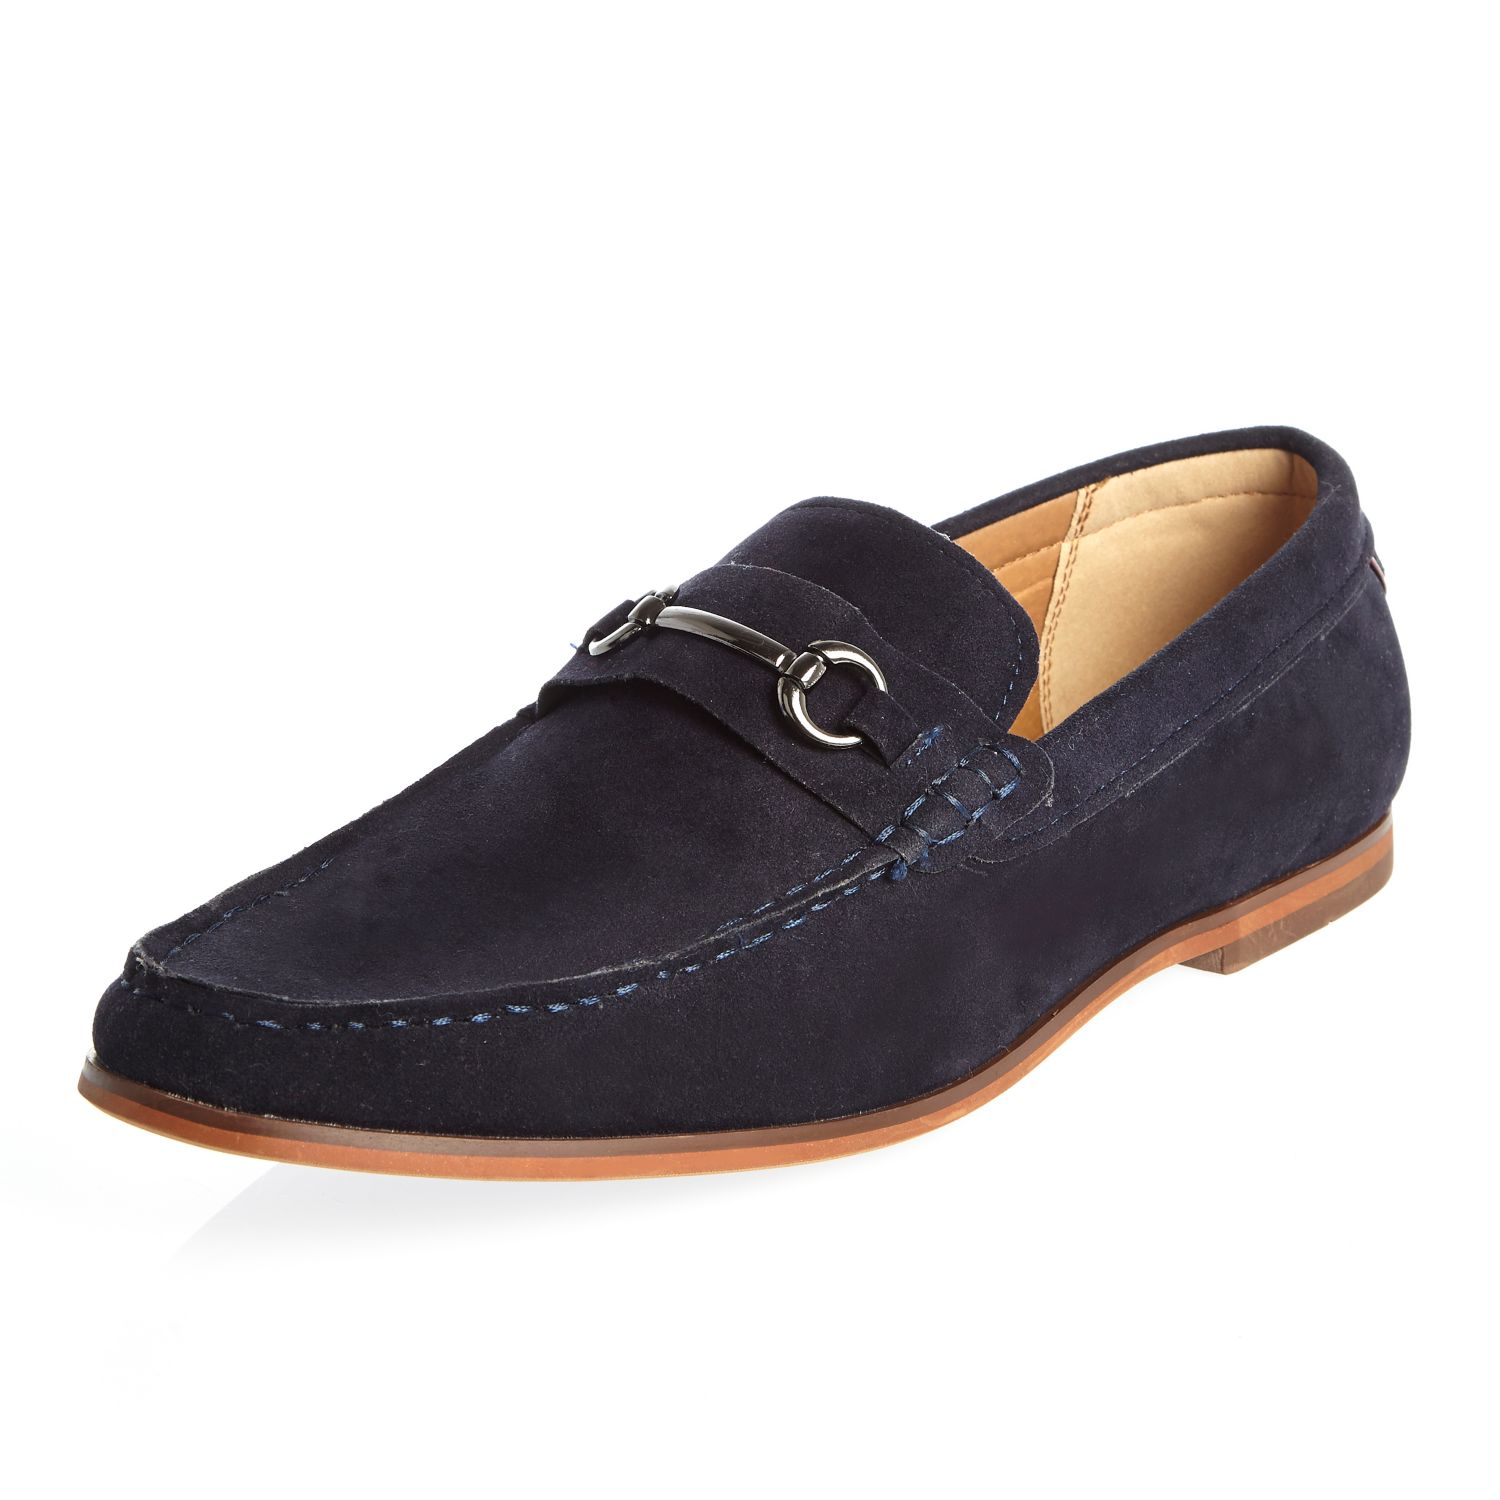 Lyst - River Island Navy Blue Snaffle Loafers in Blue for Men